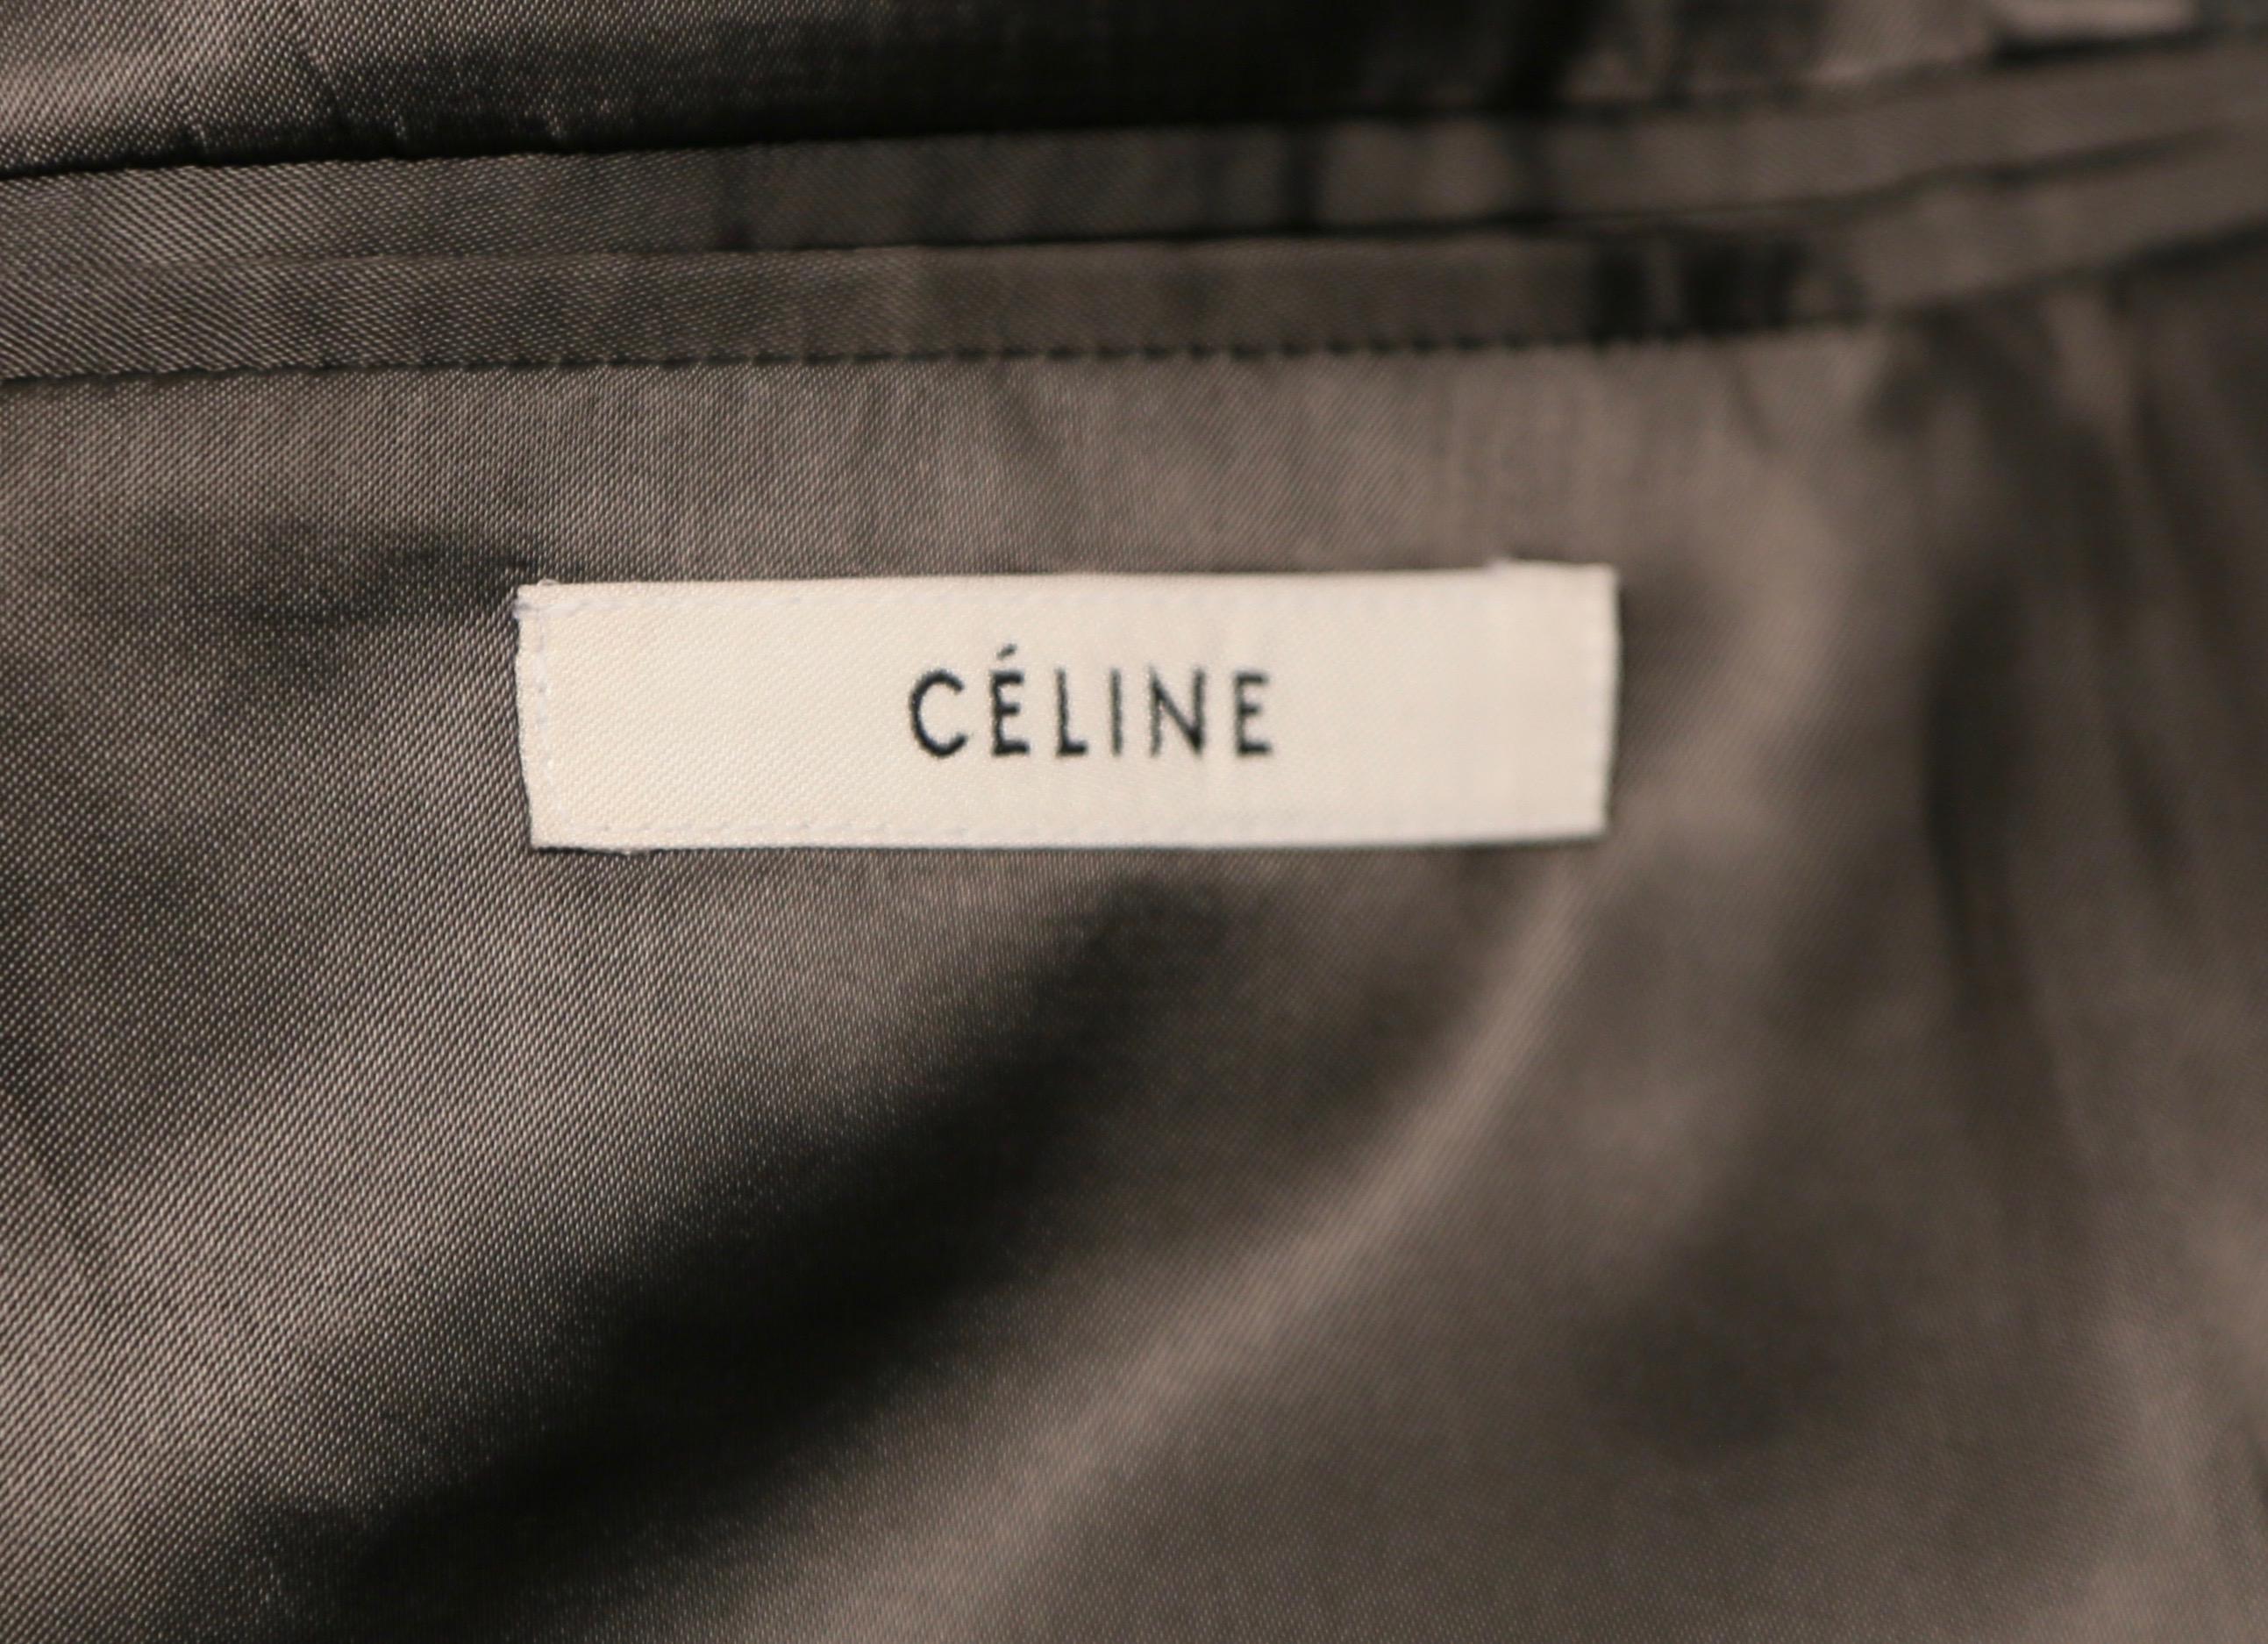 CELINE by PHOEBE PHILO charcoal grey black leather sleeve crombie coat For Sale 1